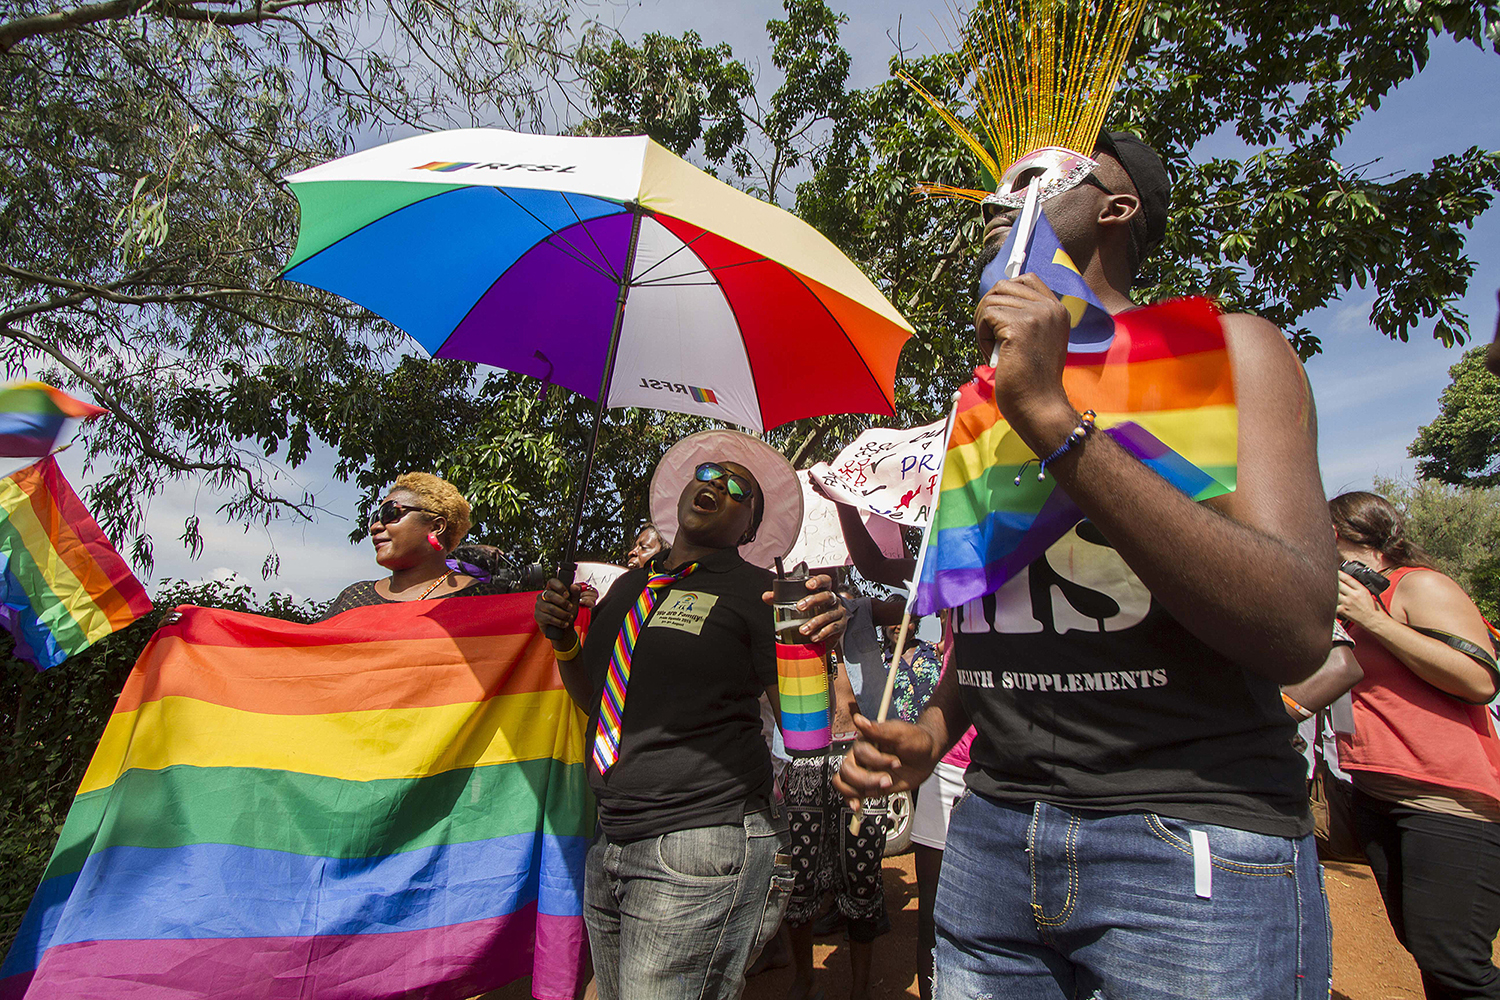 People holding rainbow flags and umbrellas take part in the Gay Pride parade in Entebbe, Uganda.